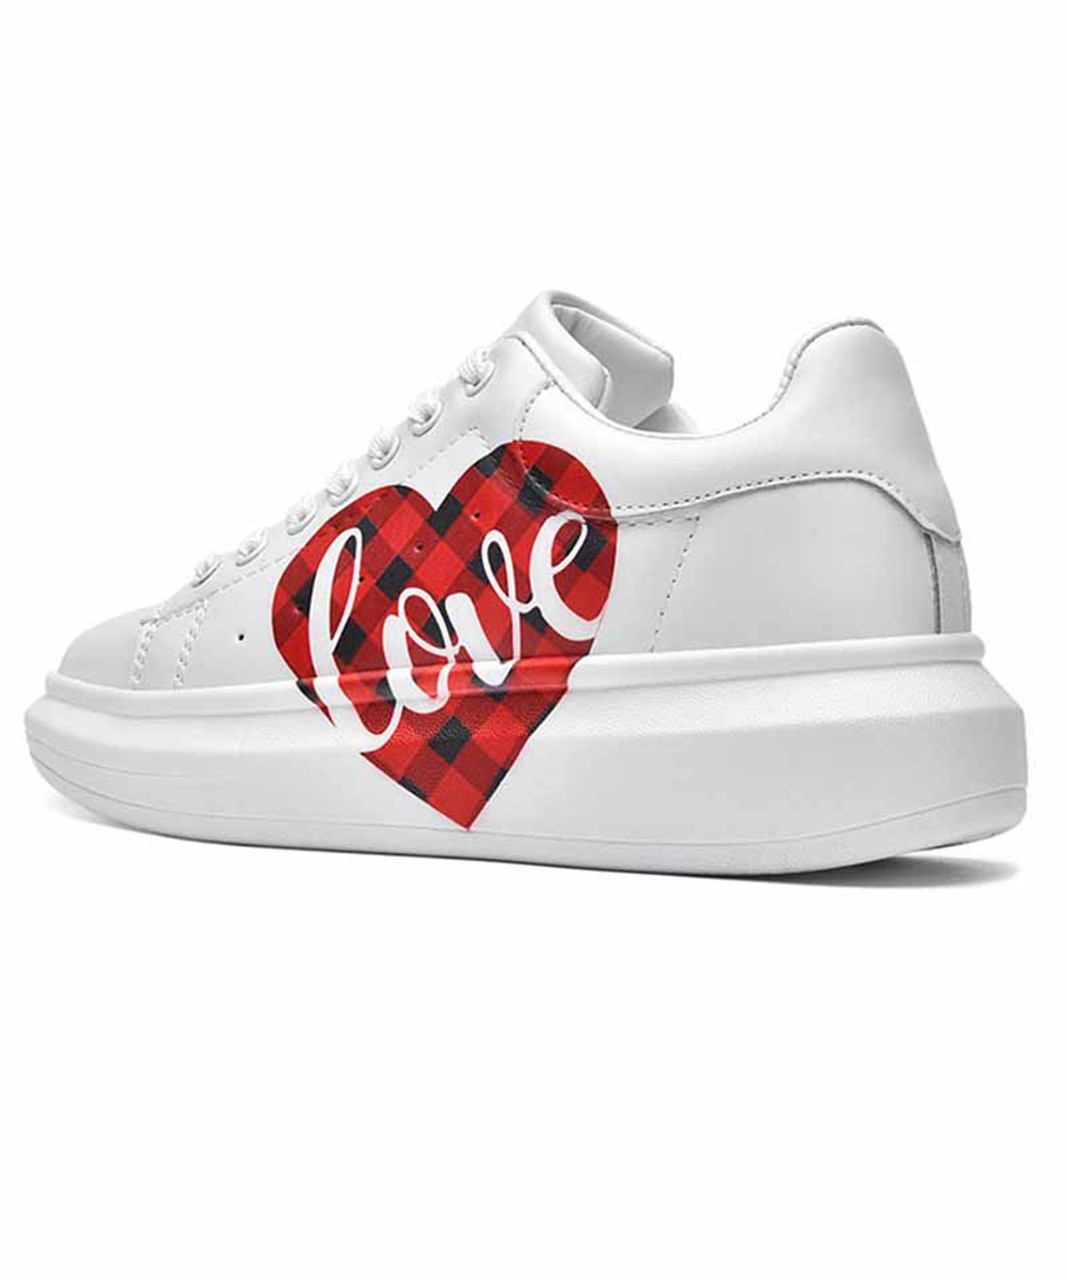 White check heart love pattern lace up shoe sneaker | Womens sneakers ...